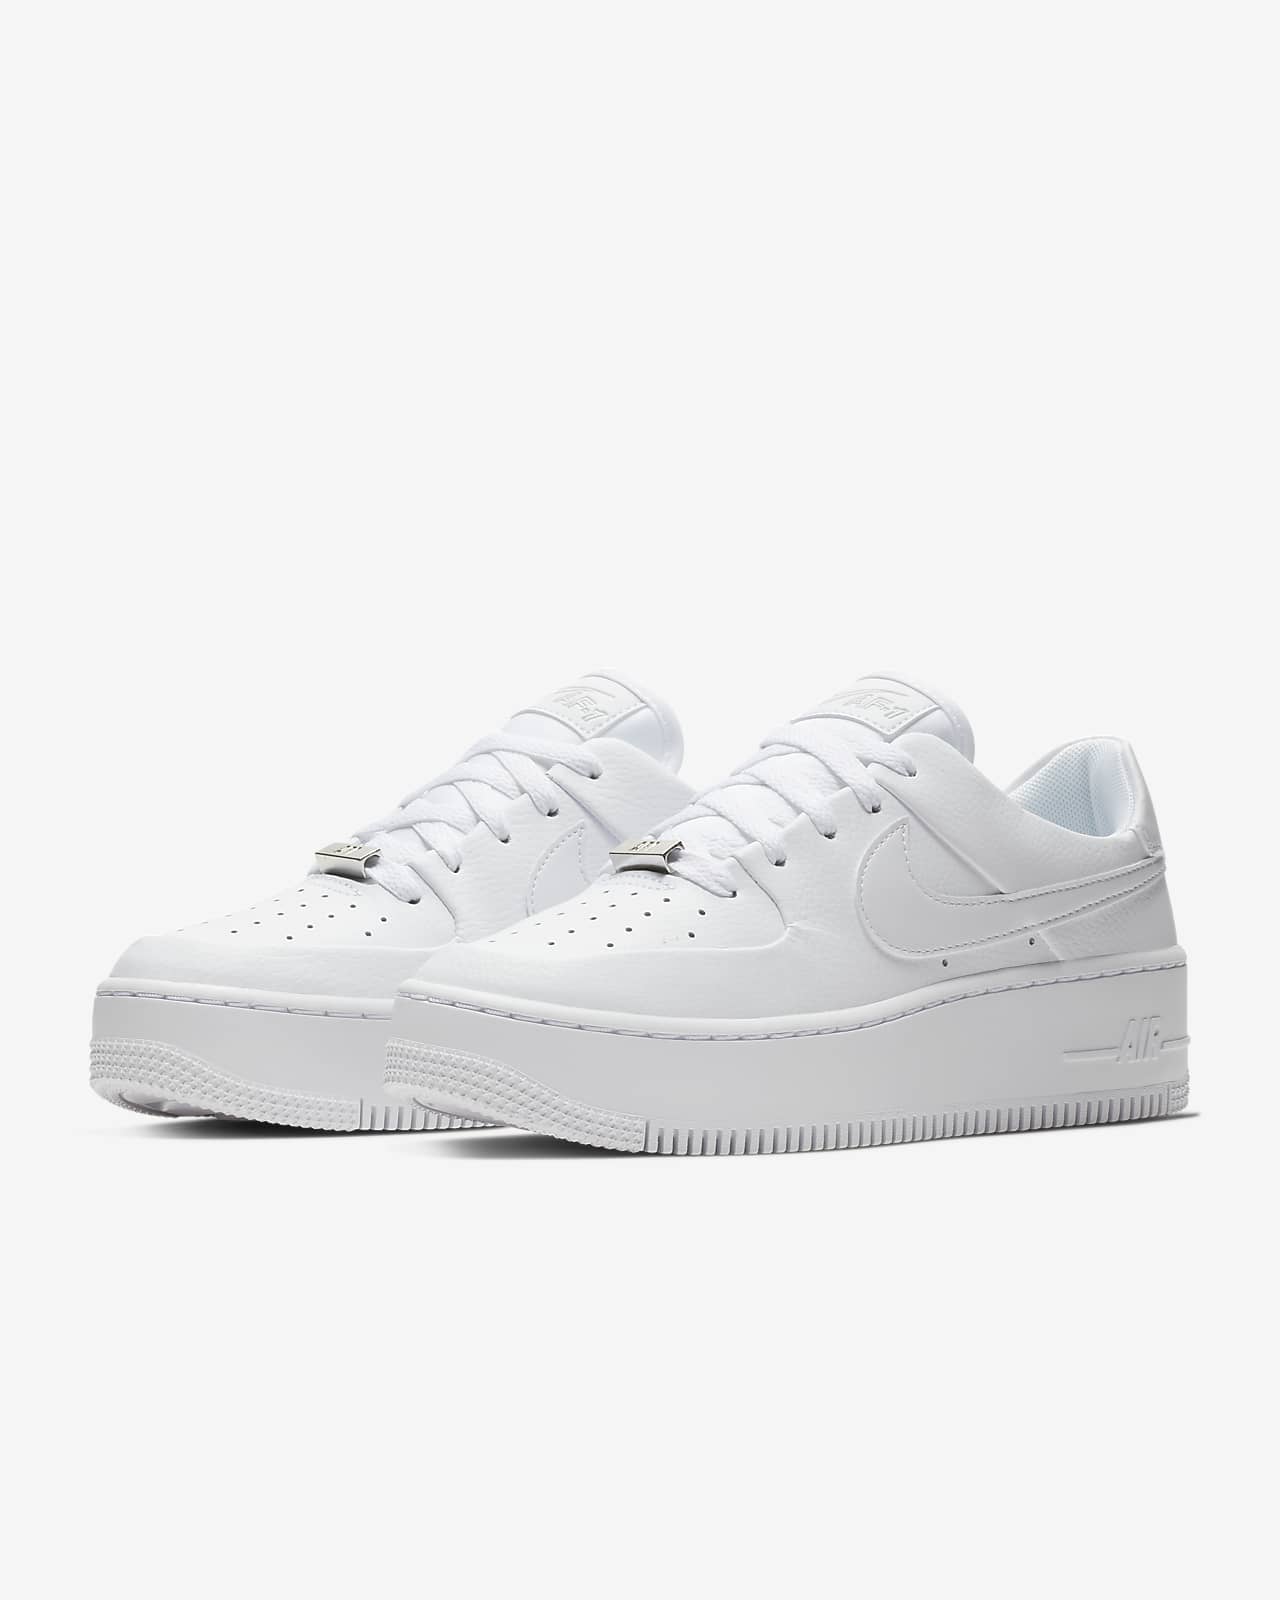 women's nike air force one shoes